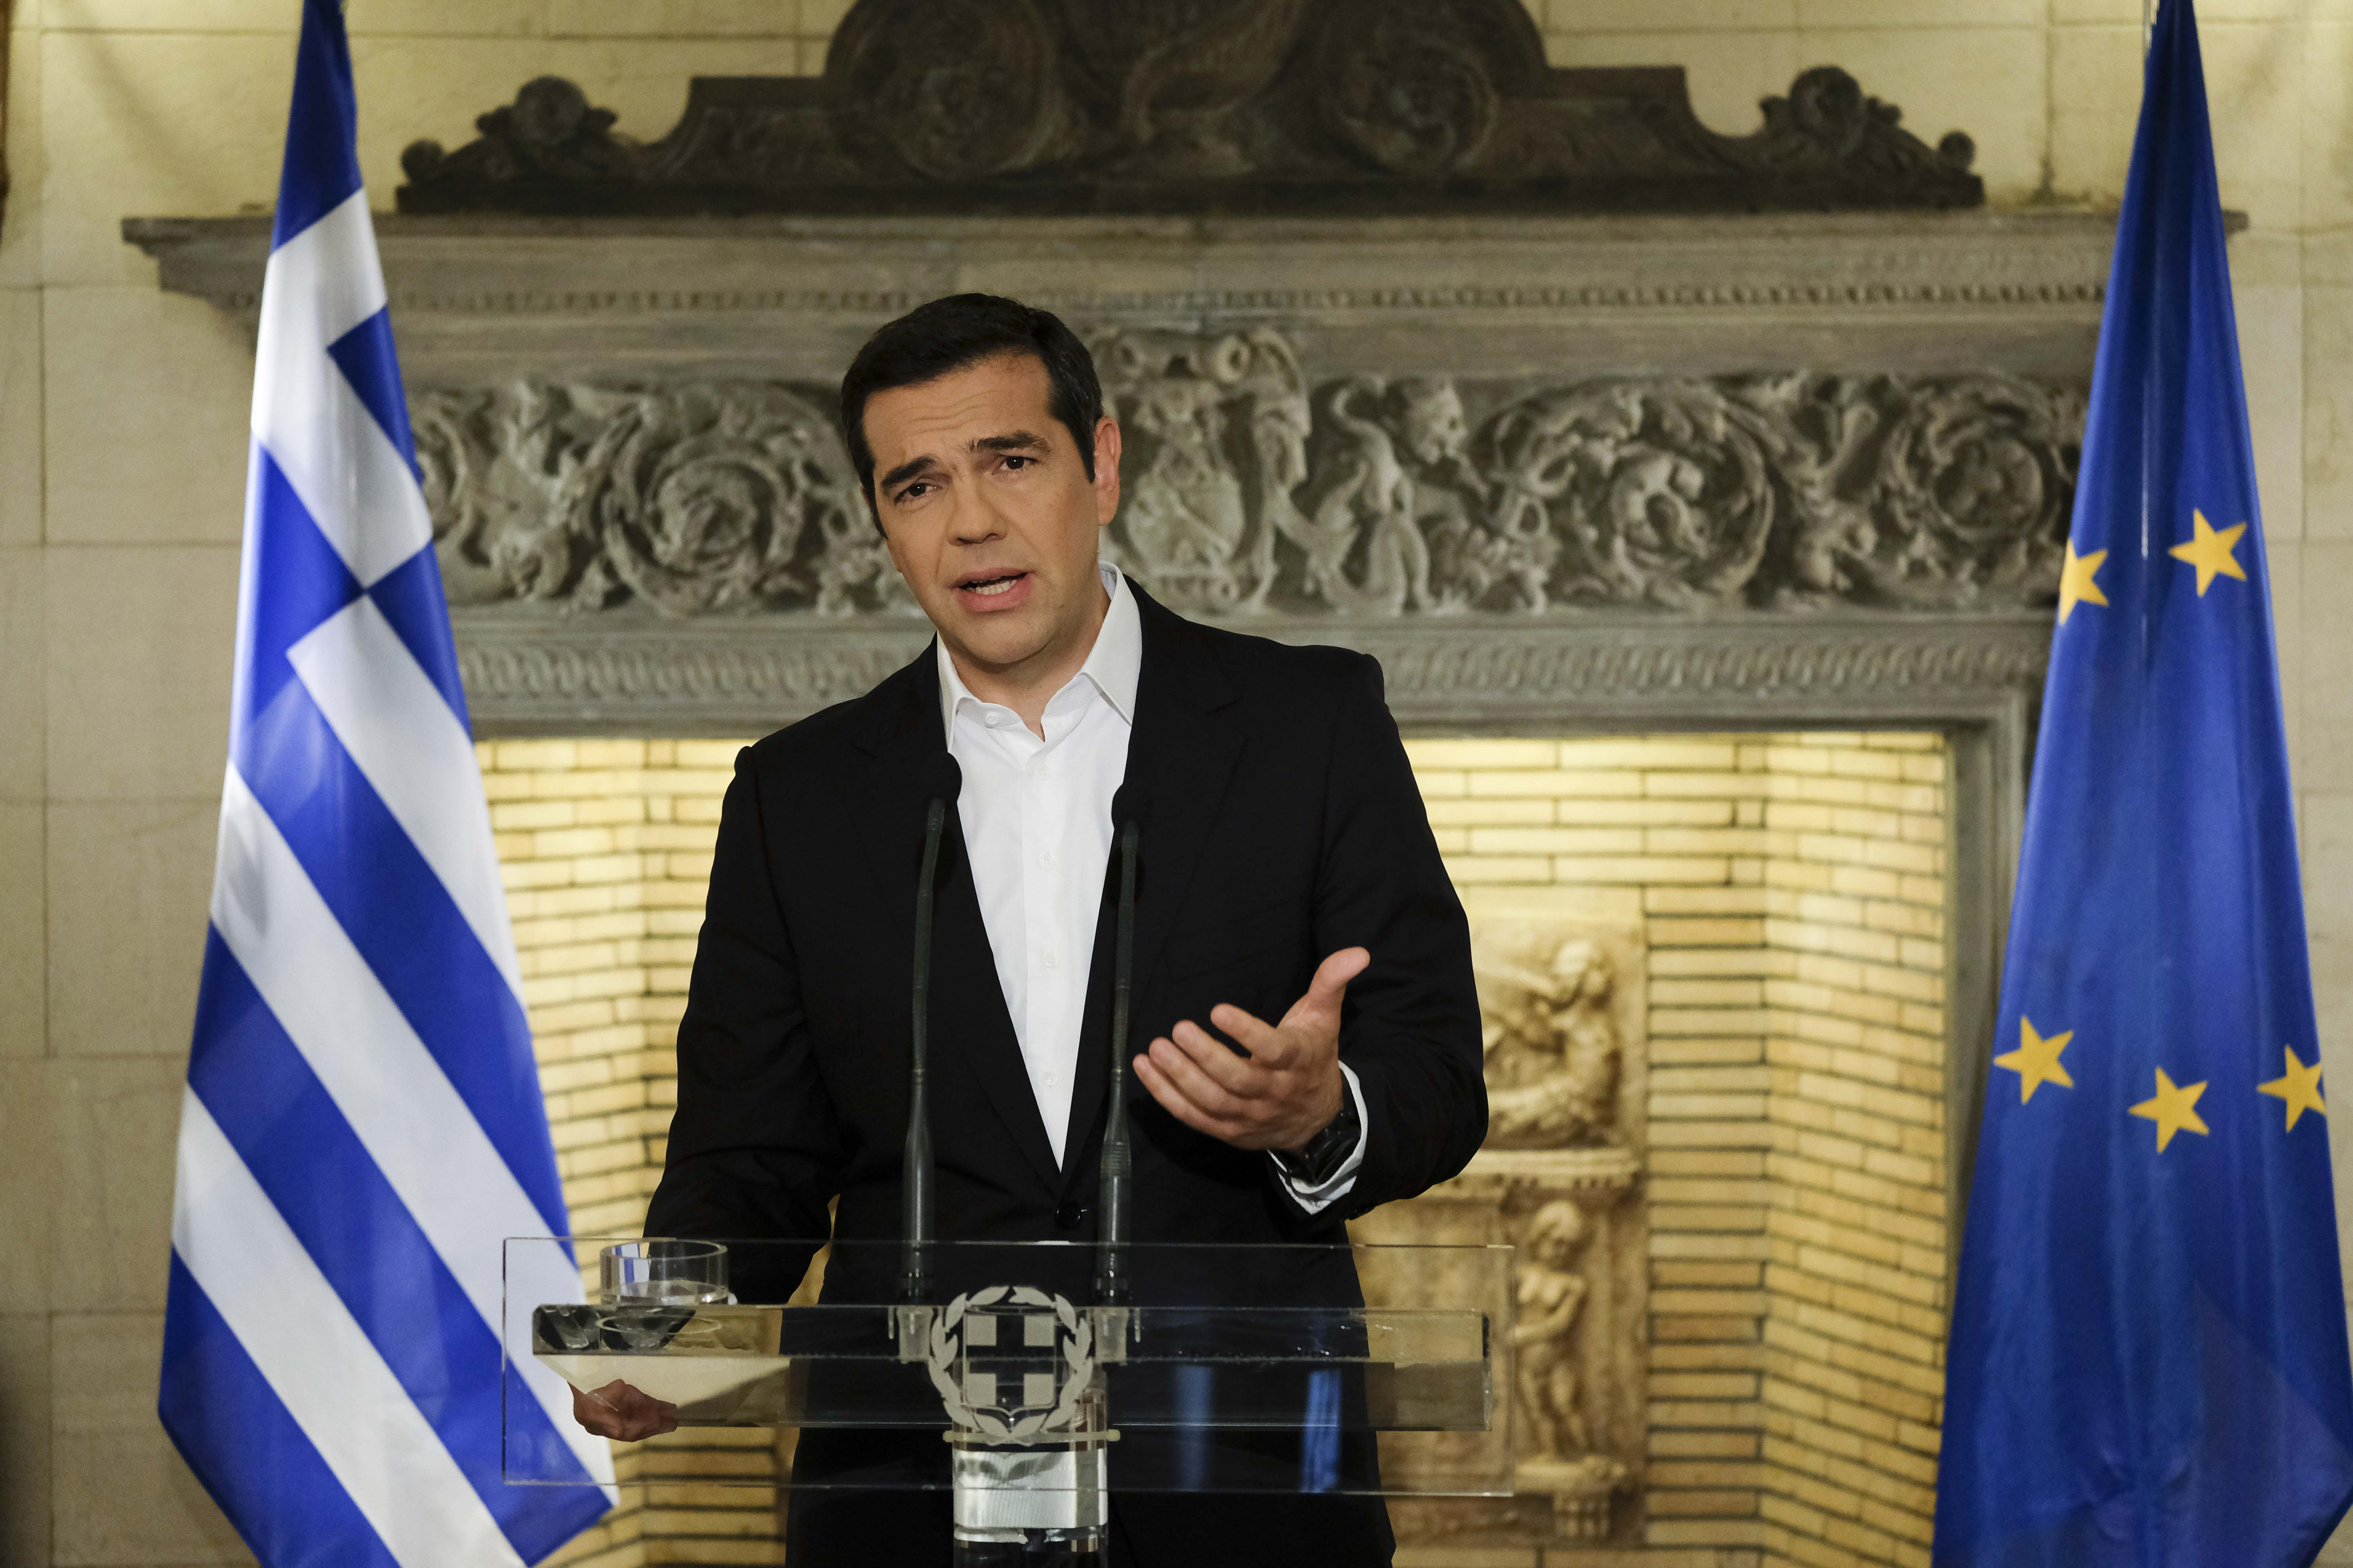 Government: Greece ‘takes back its history” through accord with FYROM